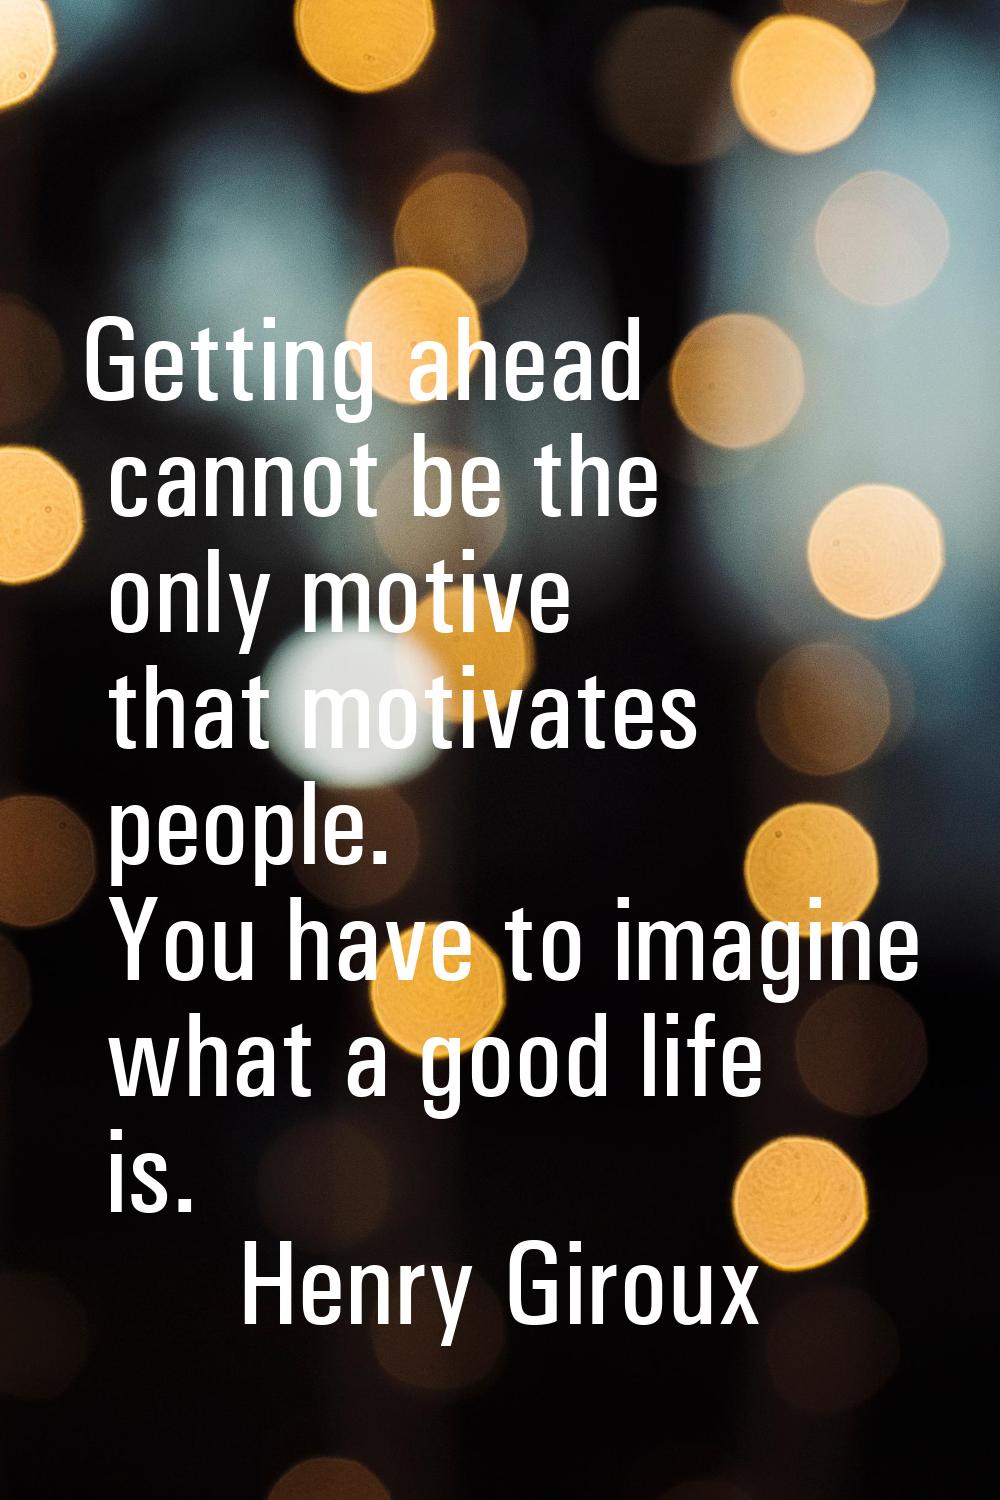 Getting ahead cannot be the only motive that motivates people. You have to imagine what a good life